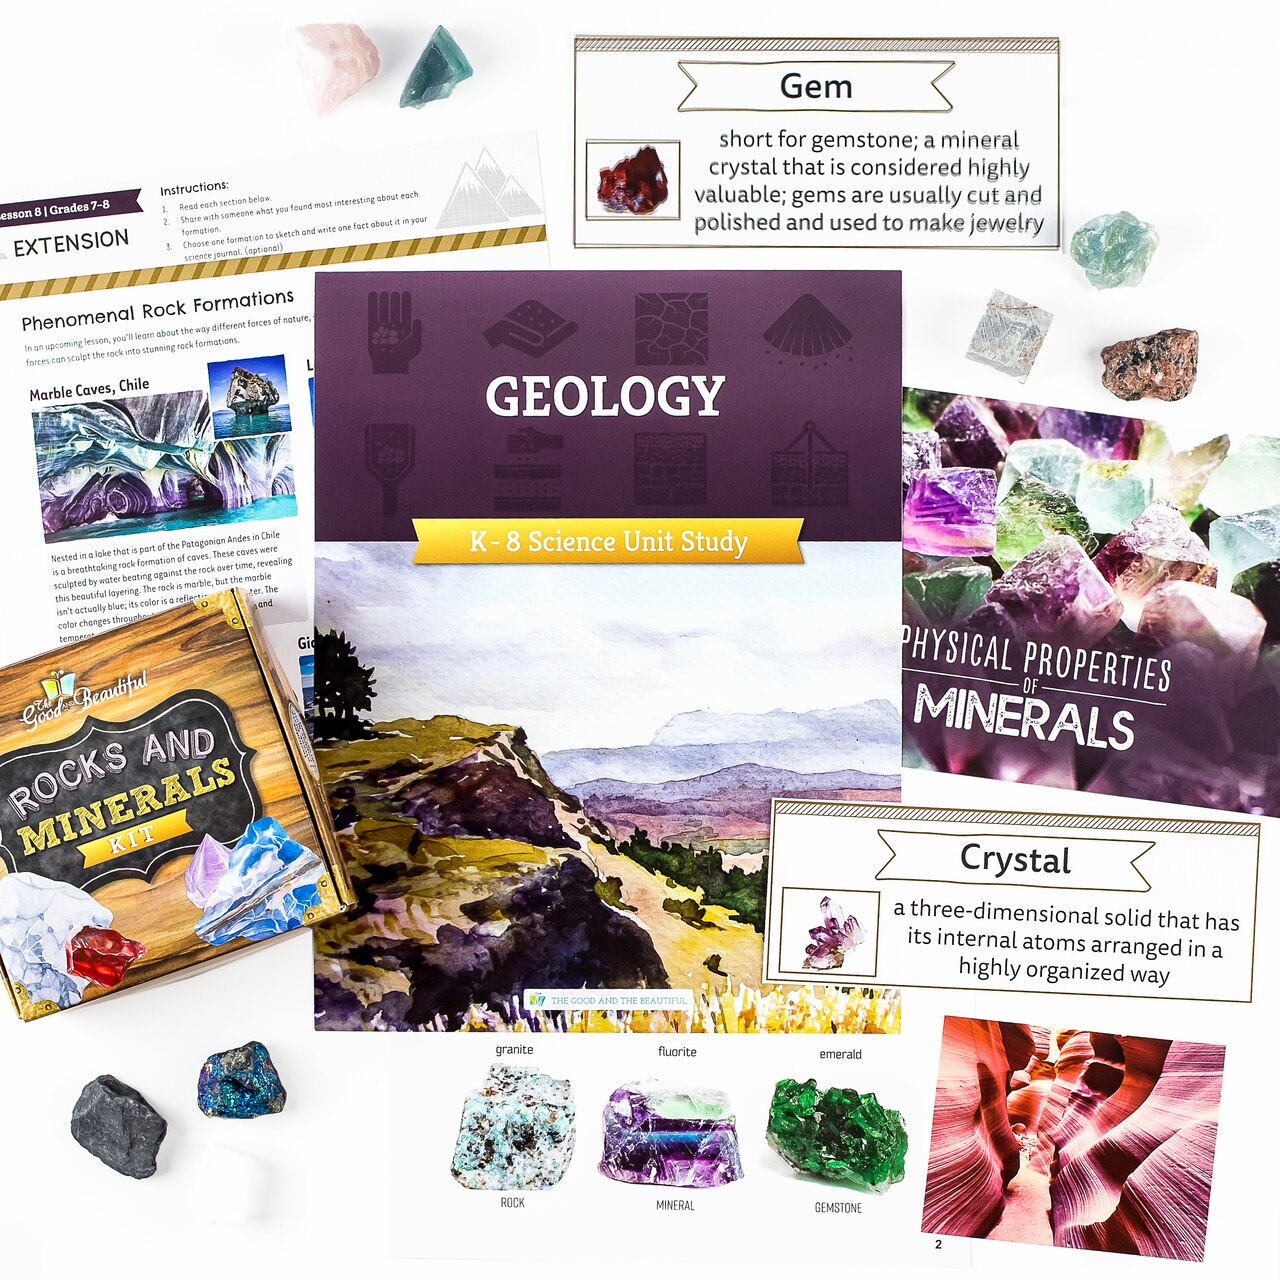 Geology Science Unit includes activities, experiments, mini books, games, and more!